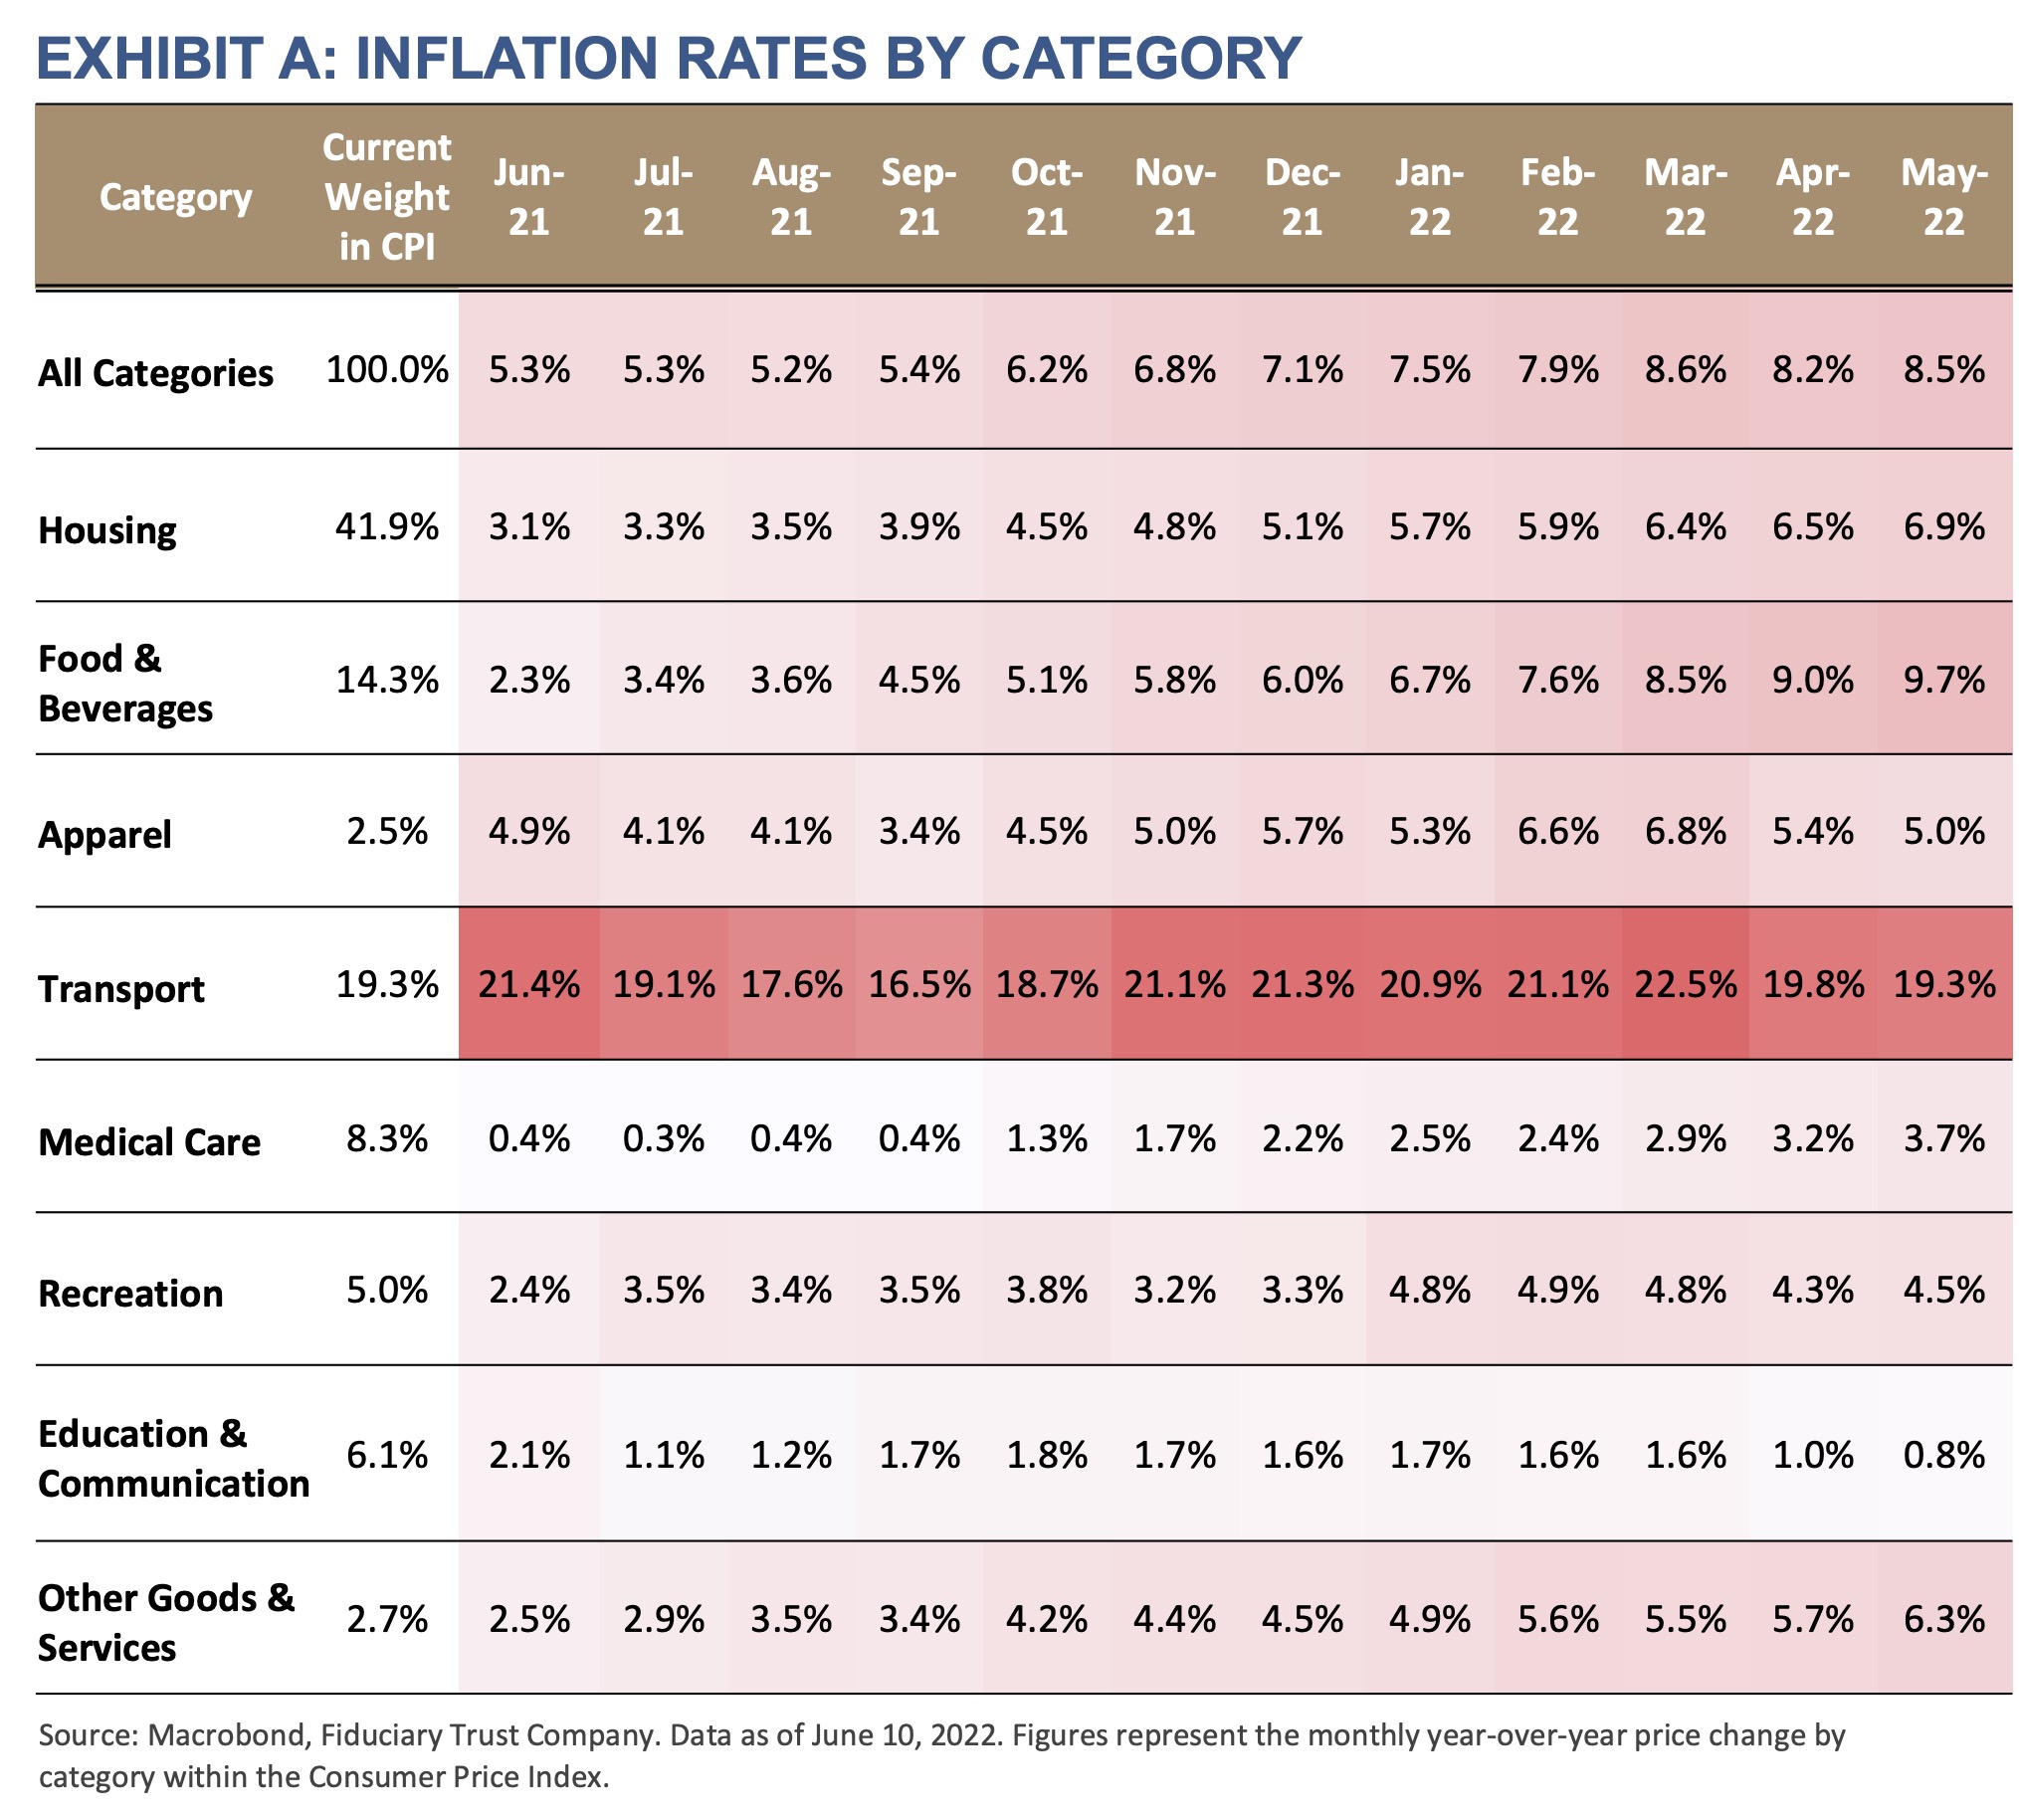 2022 Q3 Outlook - Exhibit A - Inflation Rates by Category